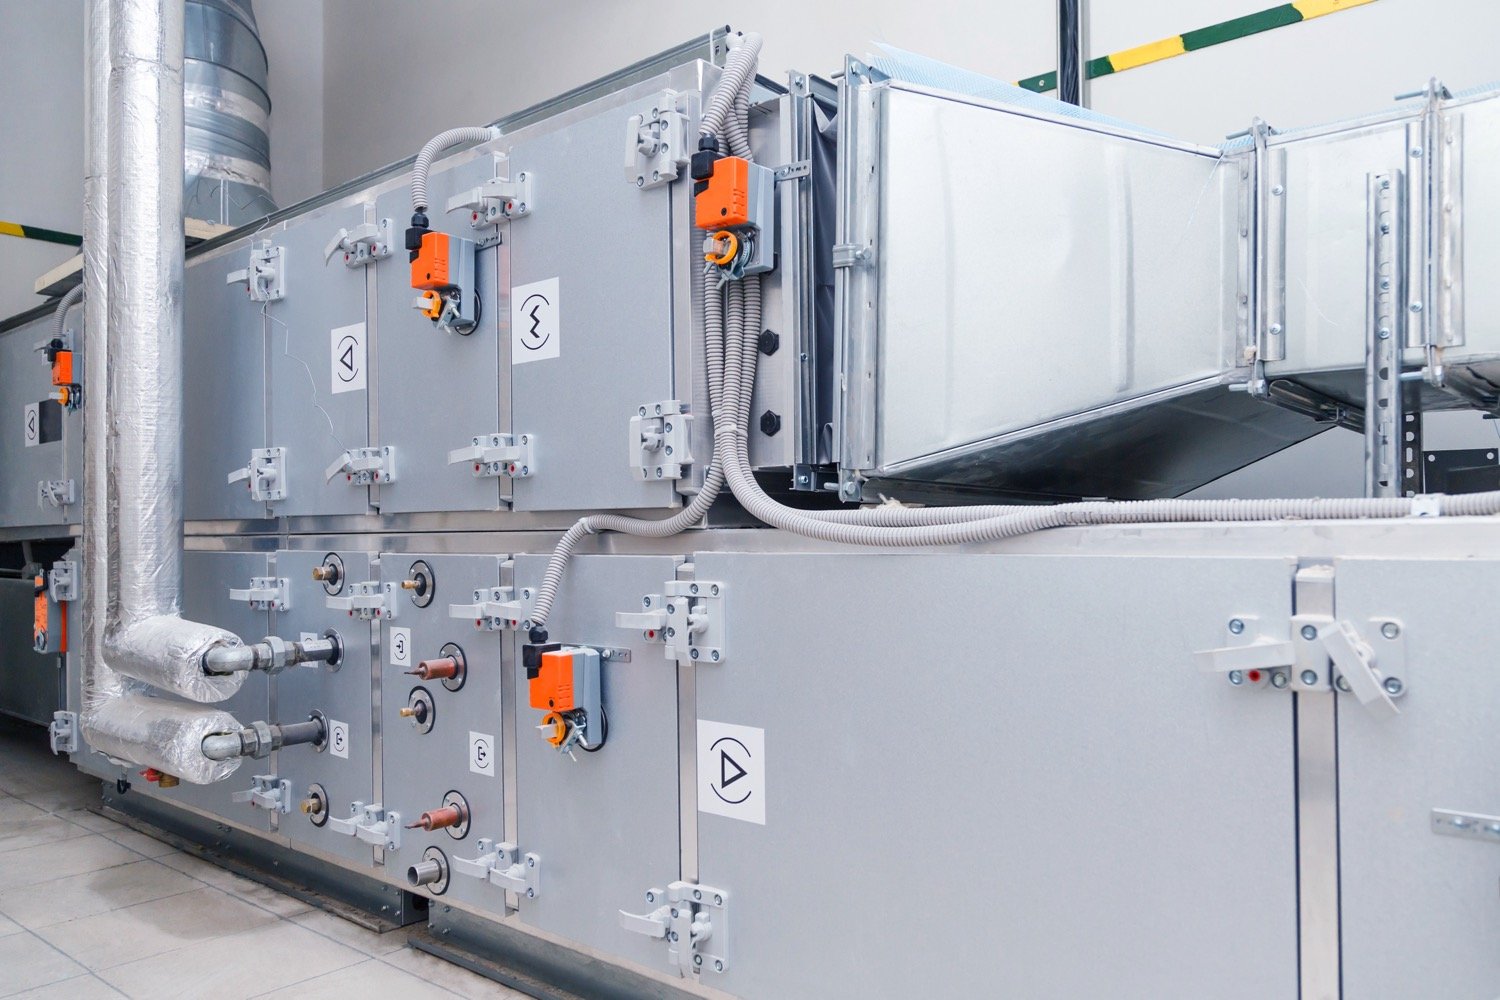  Integrating your building’s HVAC infrastructure with building automation systems helps you get the most out of high energy-efficiency equipment.